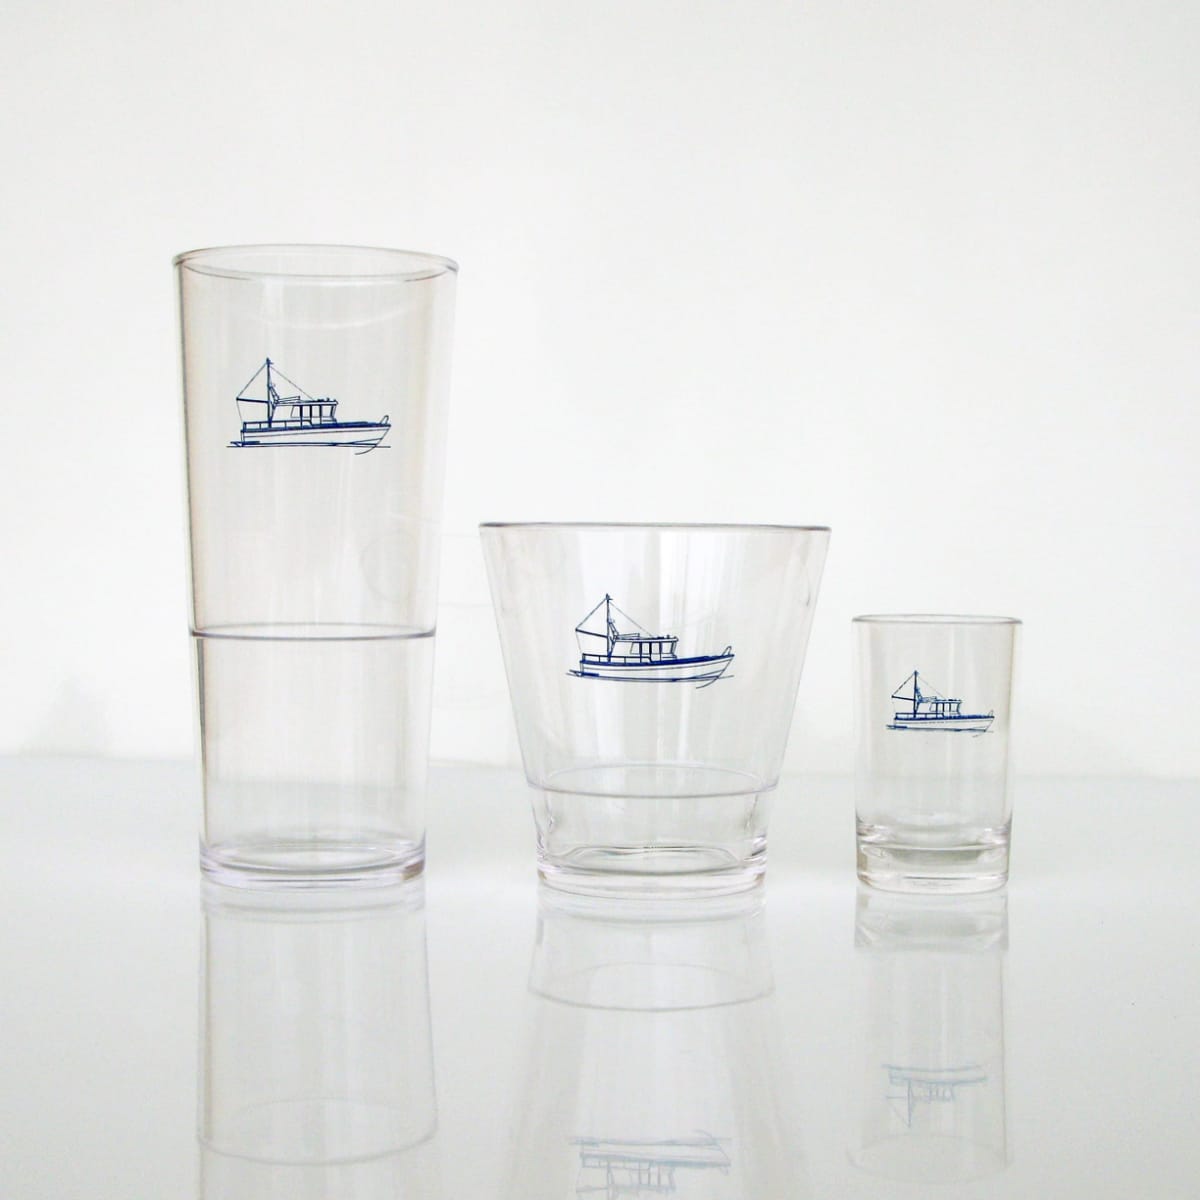 Three types of glasses in sets for either four persons (12 glasses in total) or six persons (18 glasses in total)